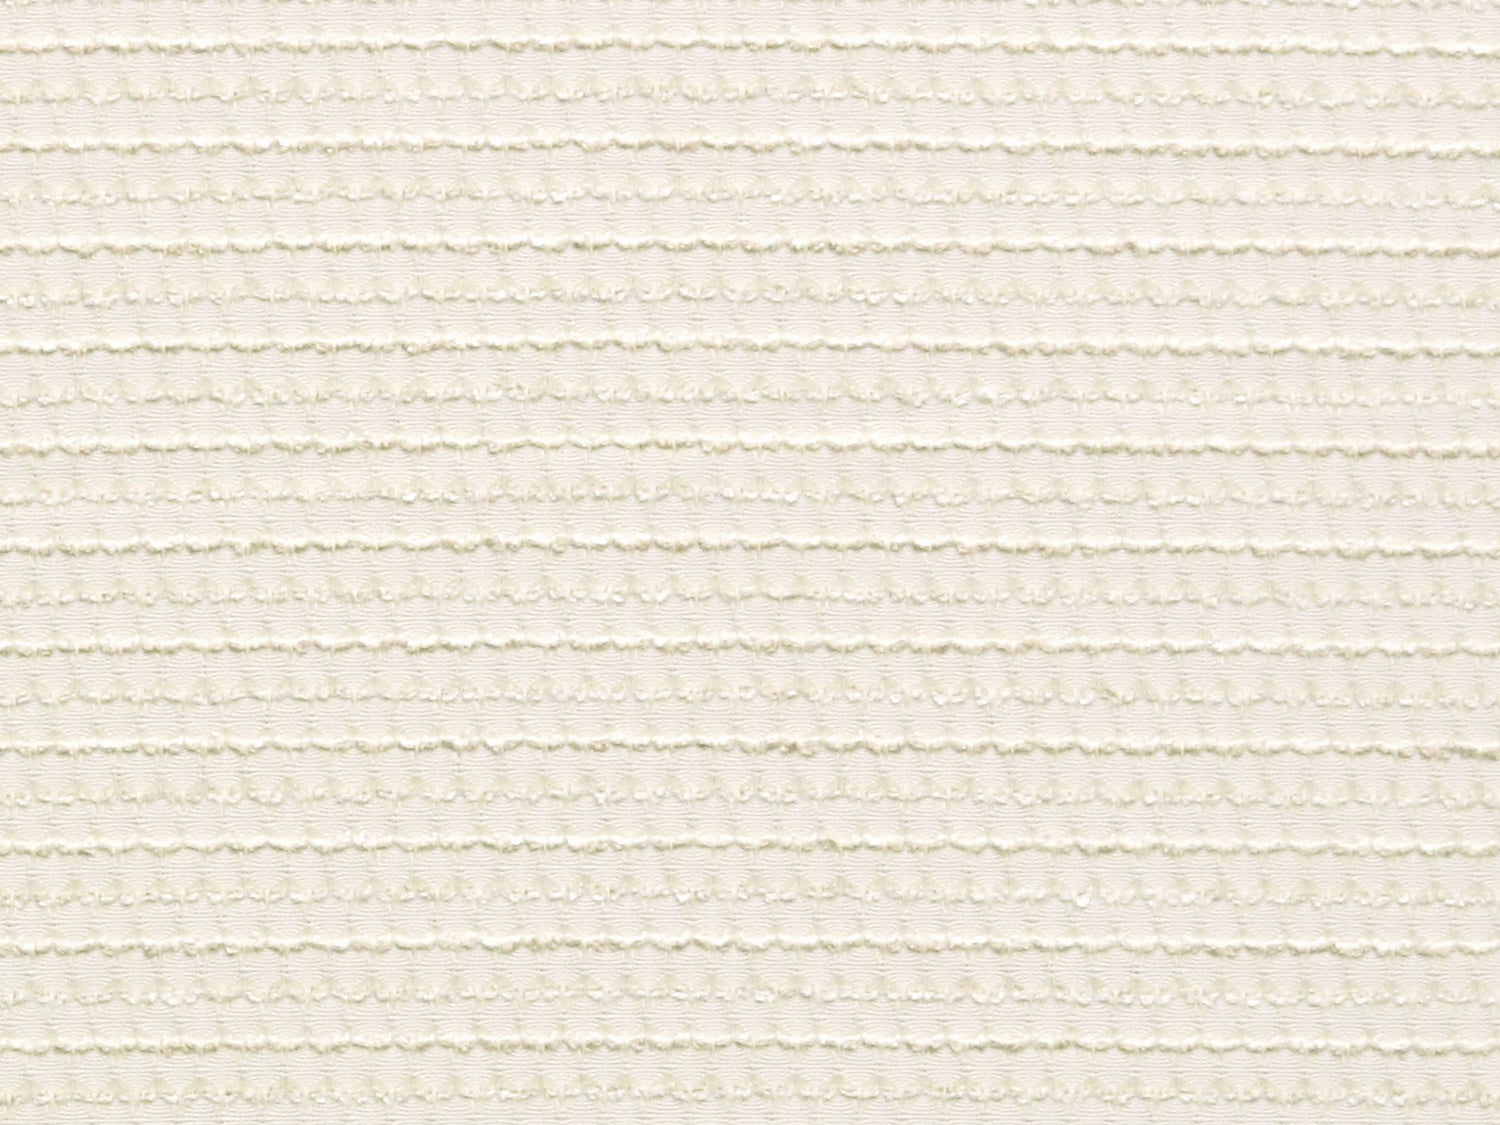 Belknap fabric in vanilla color - pattern number VW 00011532 - by Scalamandre in the Old World Weavers collection